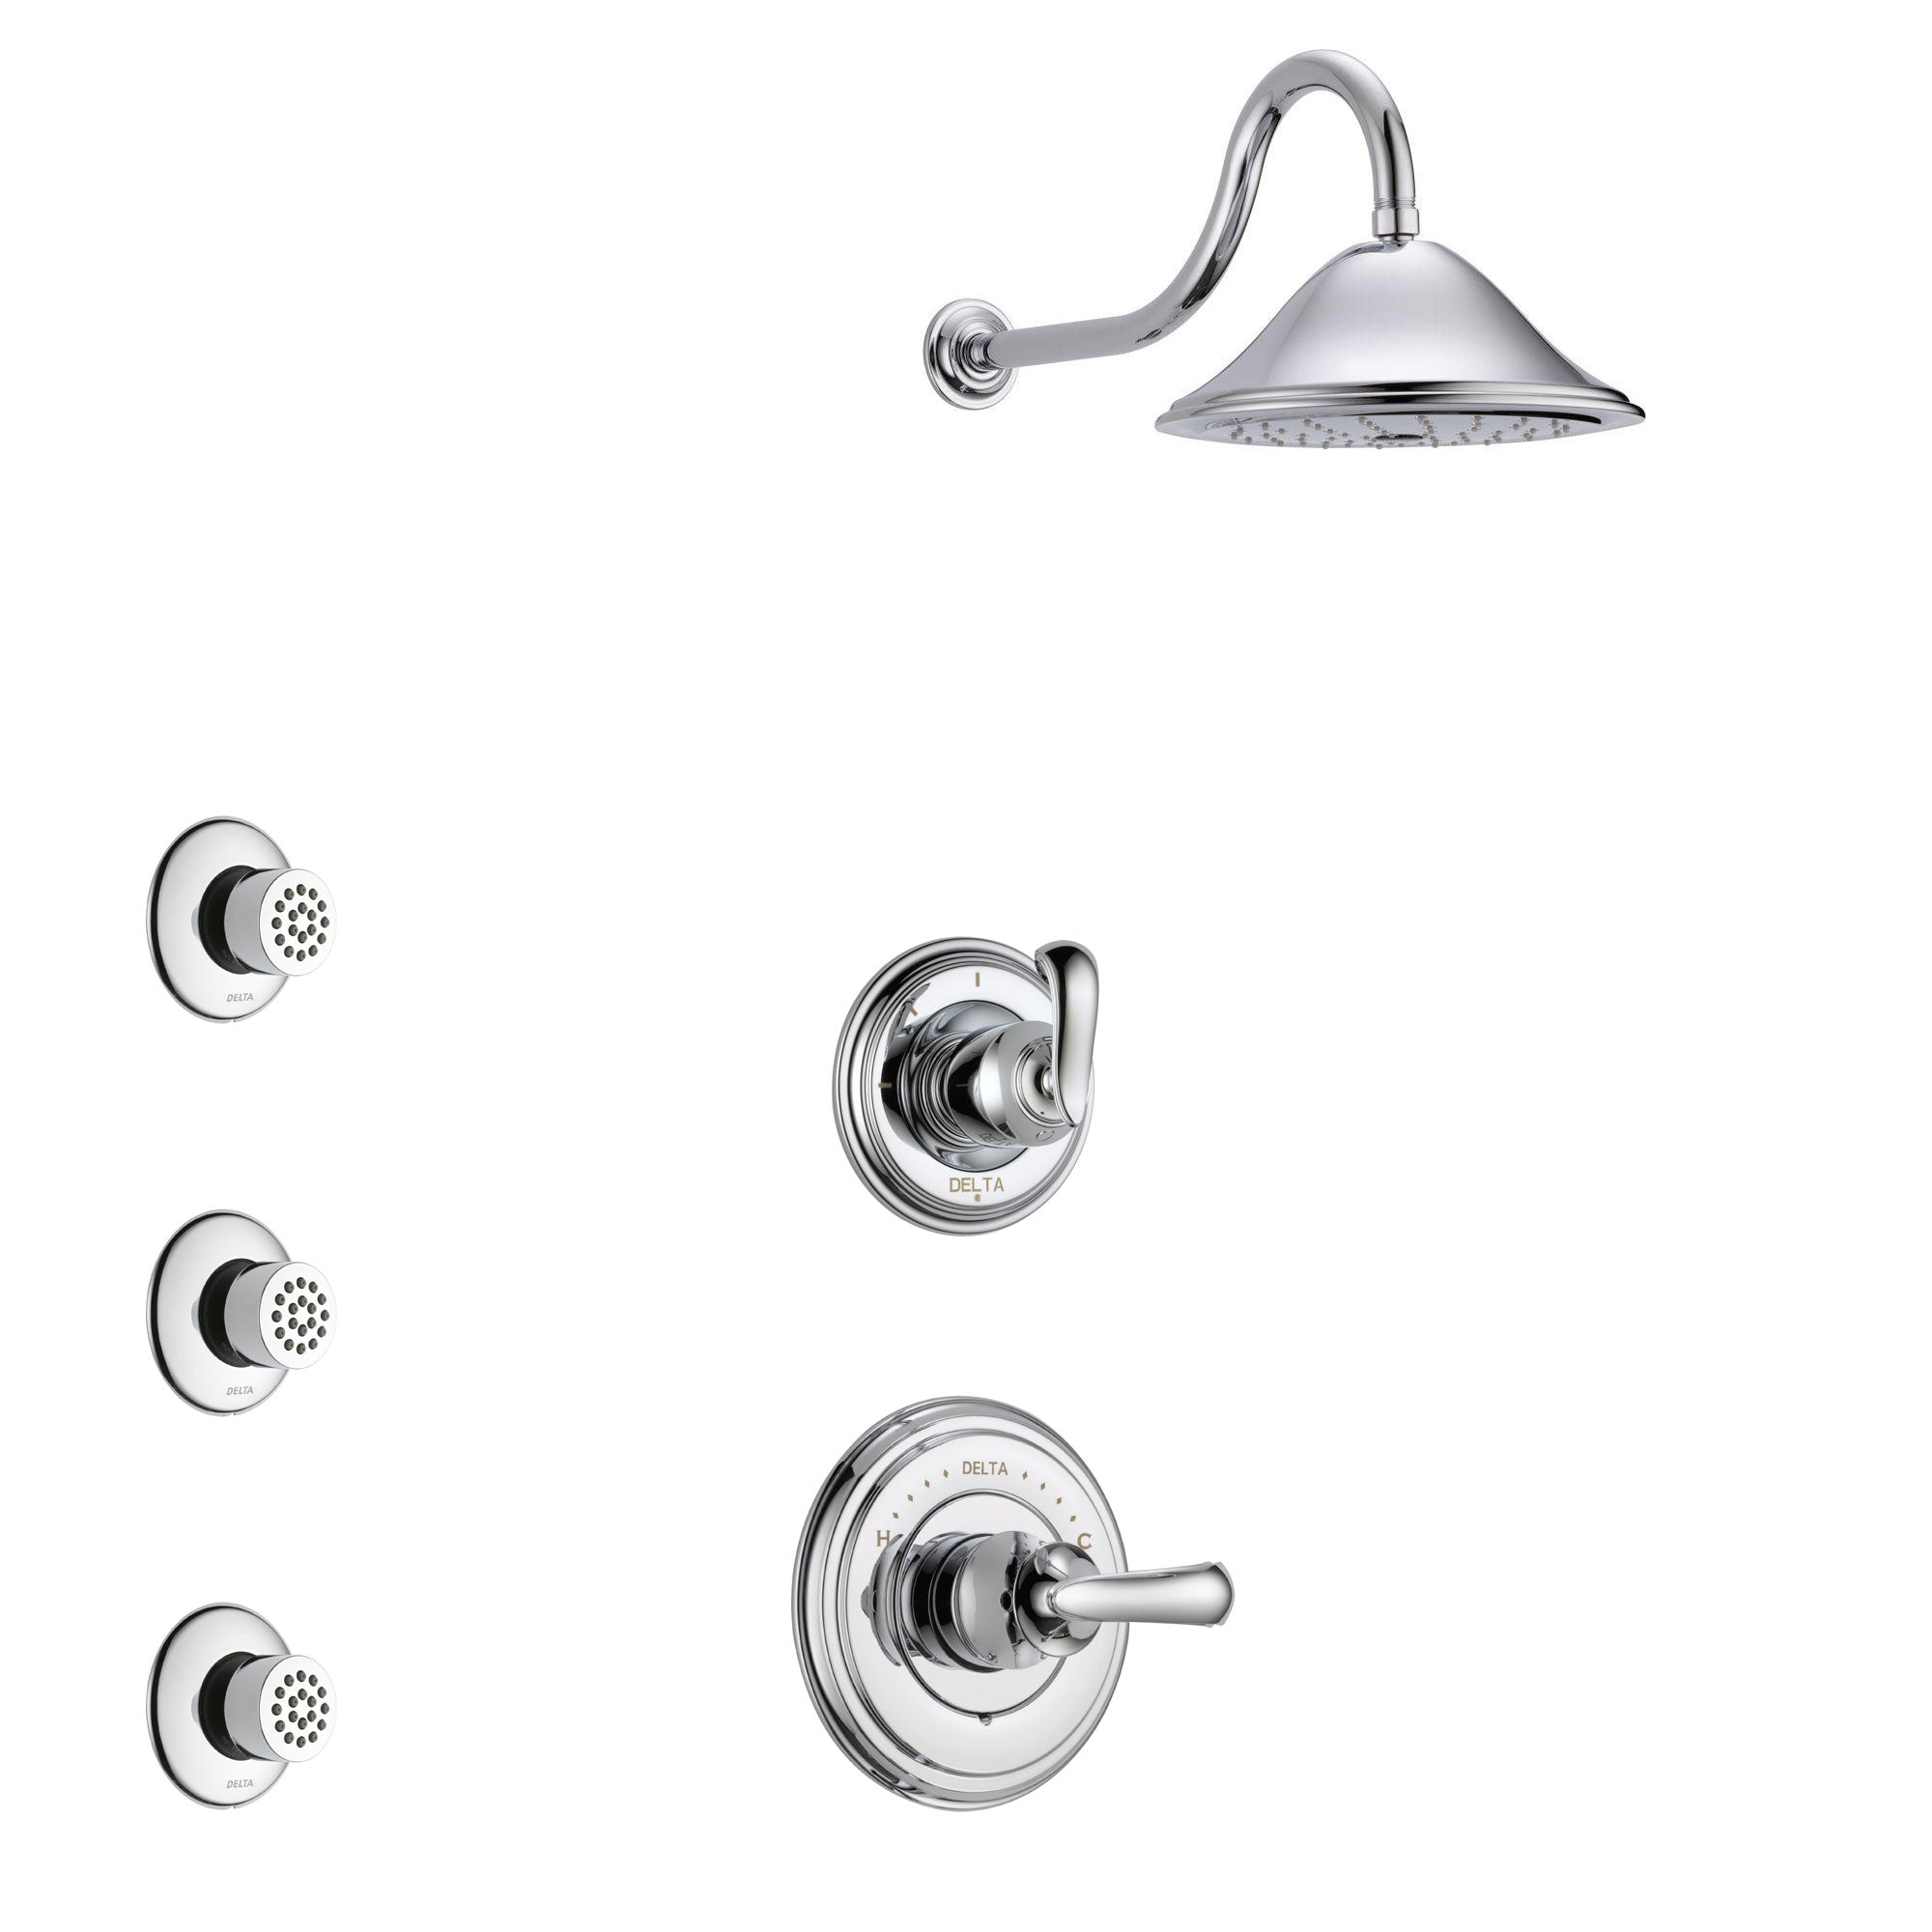 Delta Cassidy Chrome Finish Shower System with Control Handle, 3-Setting Diverter, Showerhead, and 3 Body Sprays SS149713